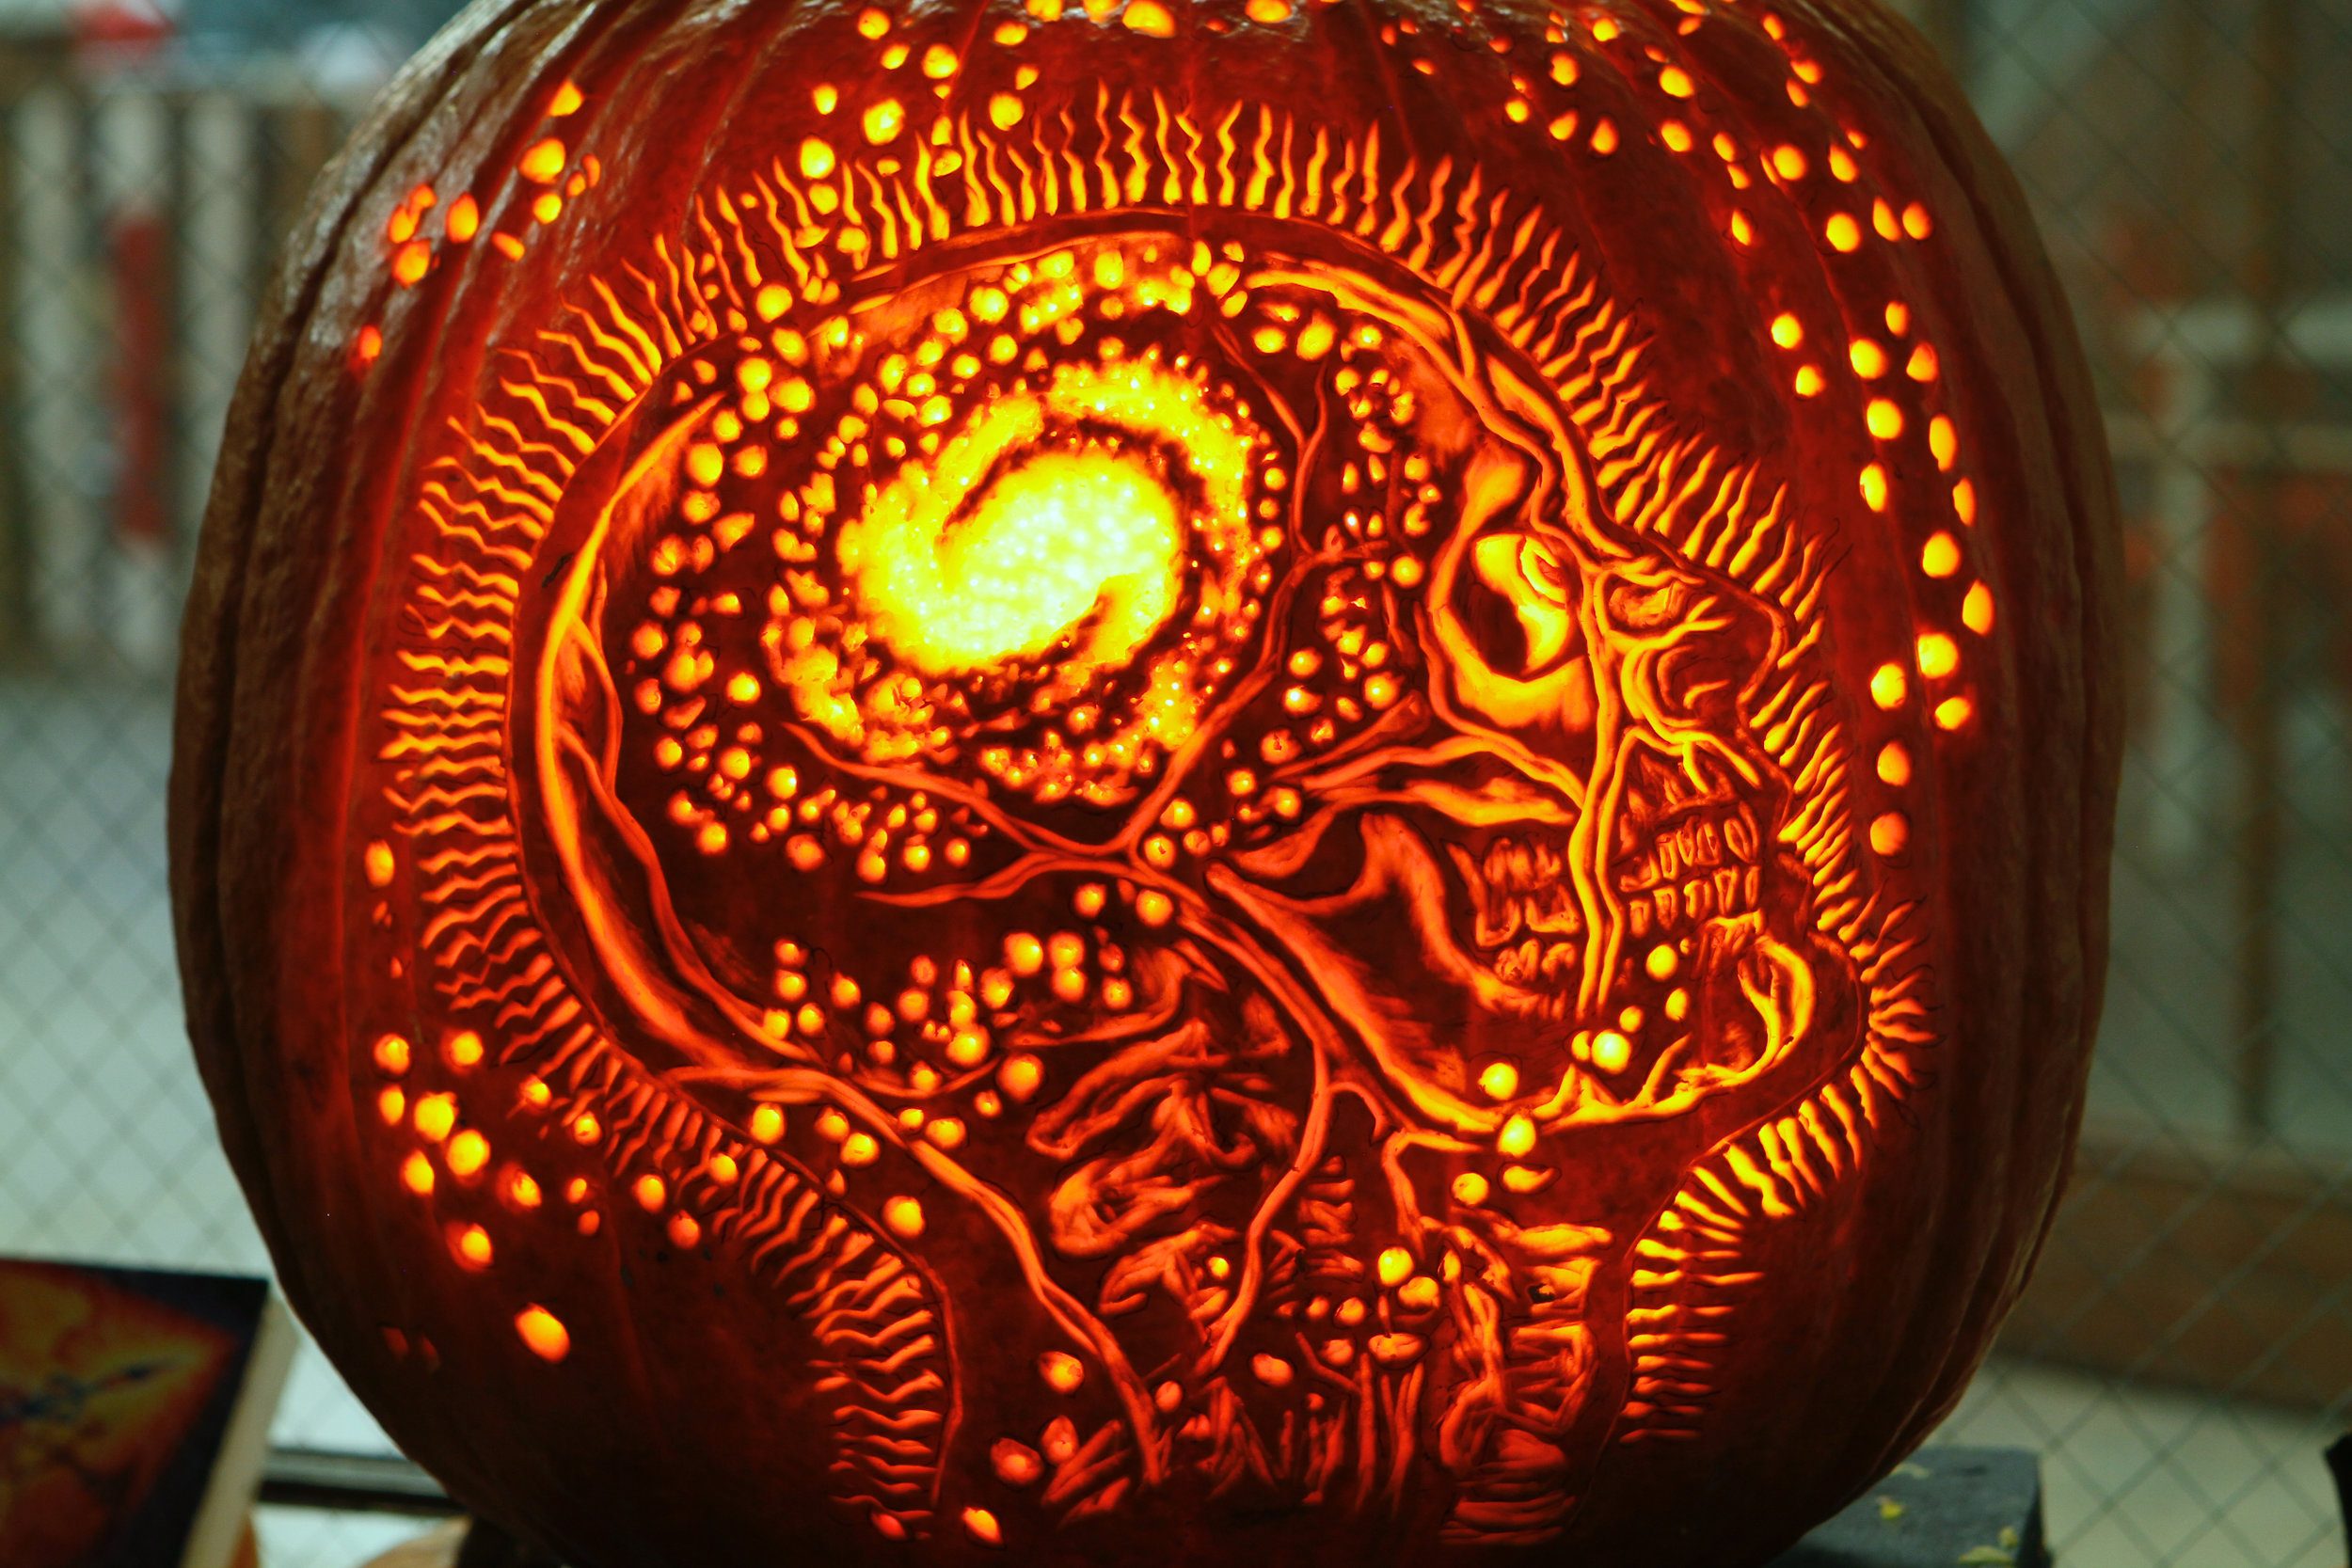 Intricately carved pumpkin of a human profile with the skull inside visible